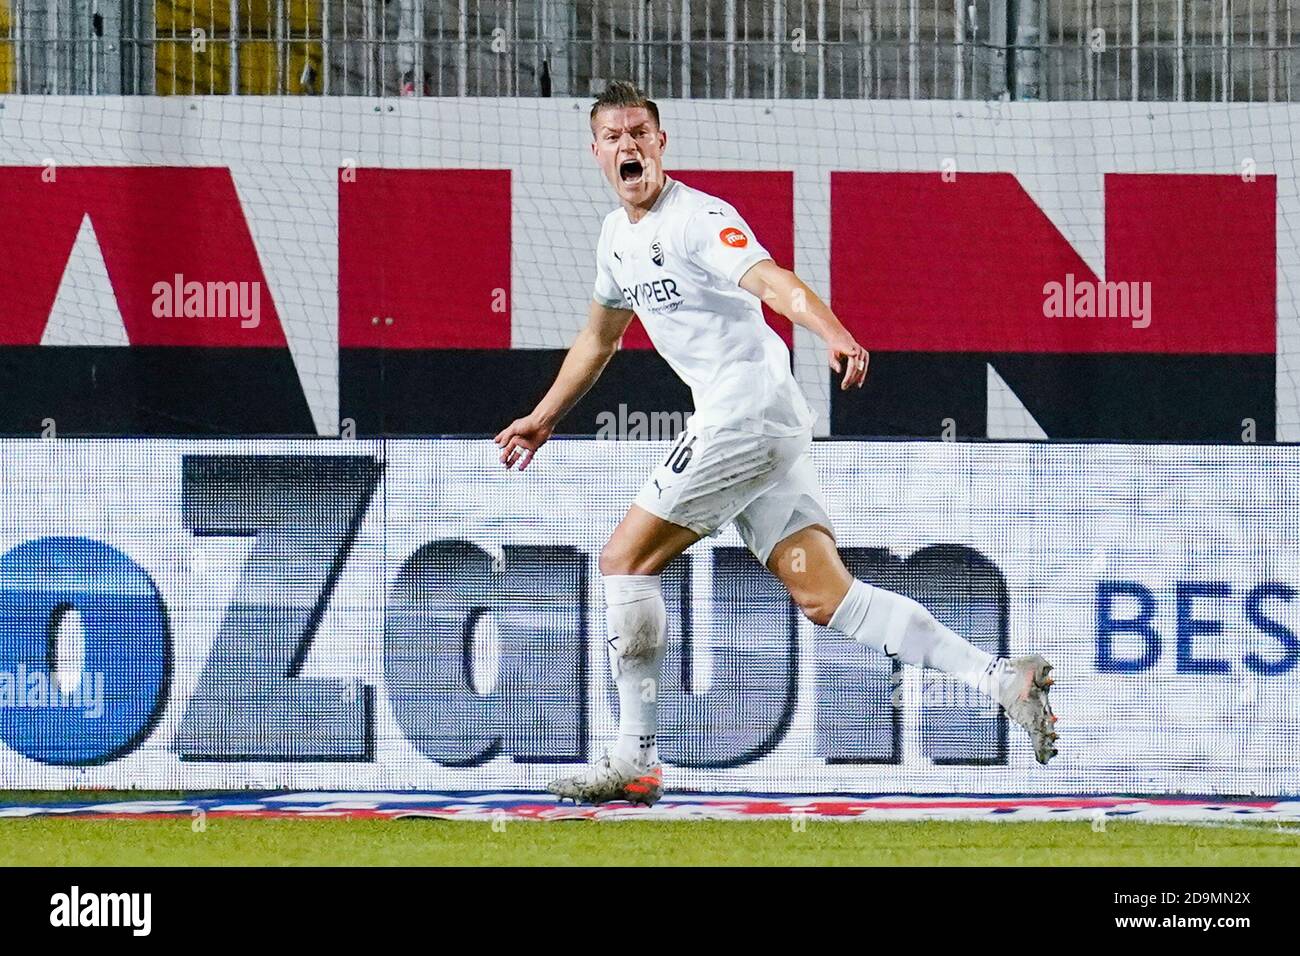 Sandhausen, Germany. 06th Nov, 2020. Football: 2nd Bundesliga, SV Sandhausen - Eintracht Braunschweig, 7th matchday, Hardtwaldstadion. Sandhausen's goal scorer Kevin Behrens cheers for the goal of the 2:0. Credit: Uwe Anspach/dpa - IMPORTANT NOTE: In accordance with the regulations of the DFL Deutsche Fußball Liga and the DFB Deutscher Fußball-Bund, it is prohibited to exploit or have exploited in the stadium and/or from the game taken photographs in the form of sequence images and/or video-like photo series./dpa/Alamy Live News Stock Photo